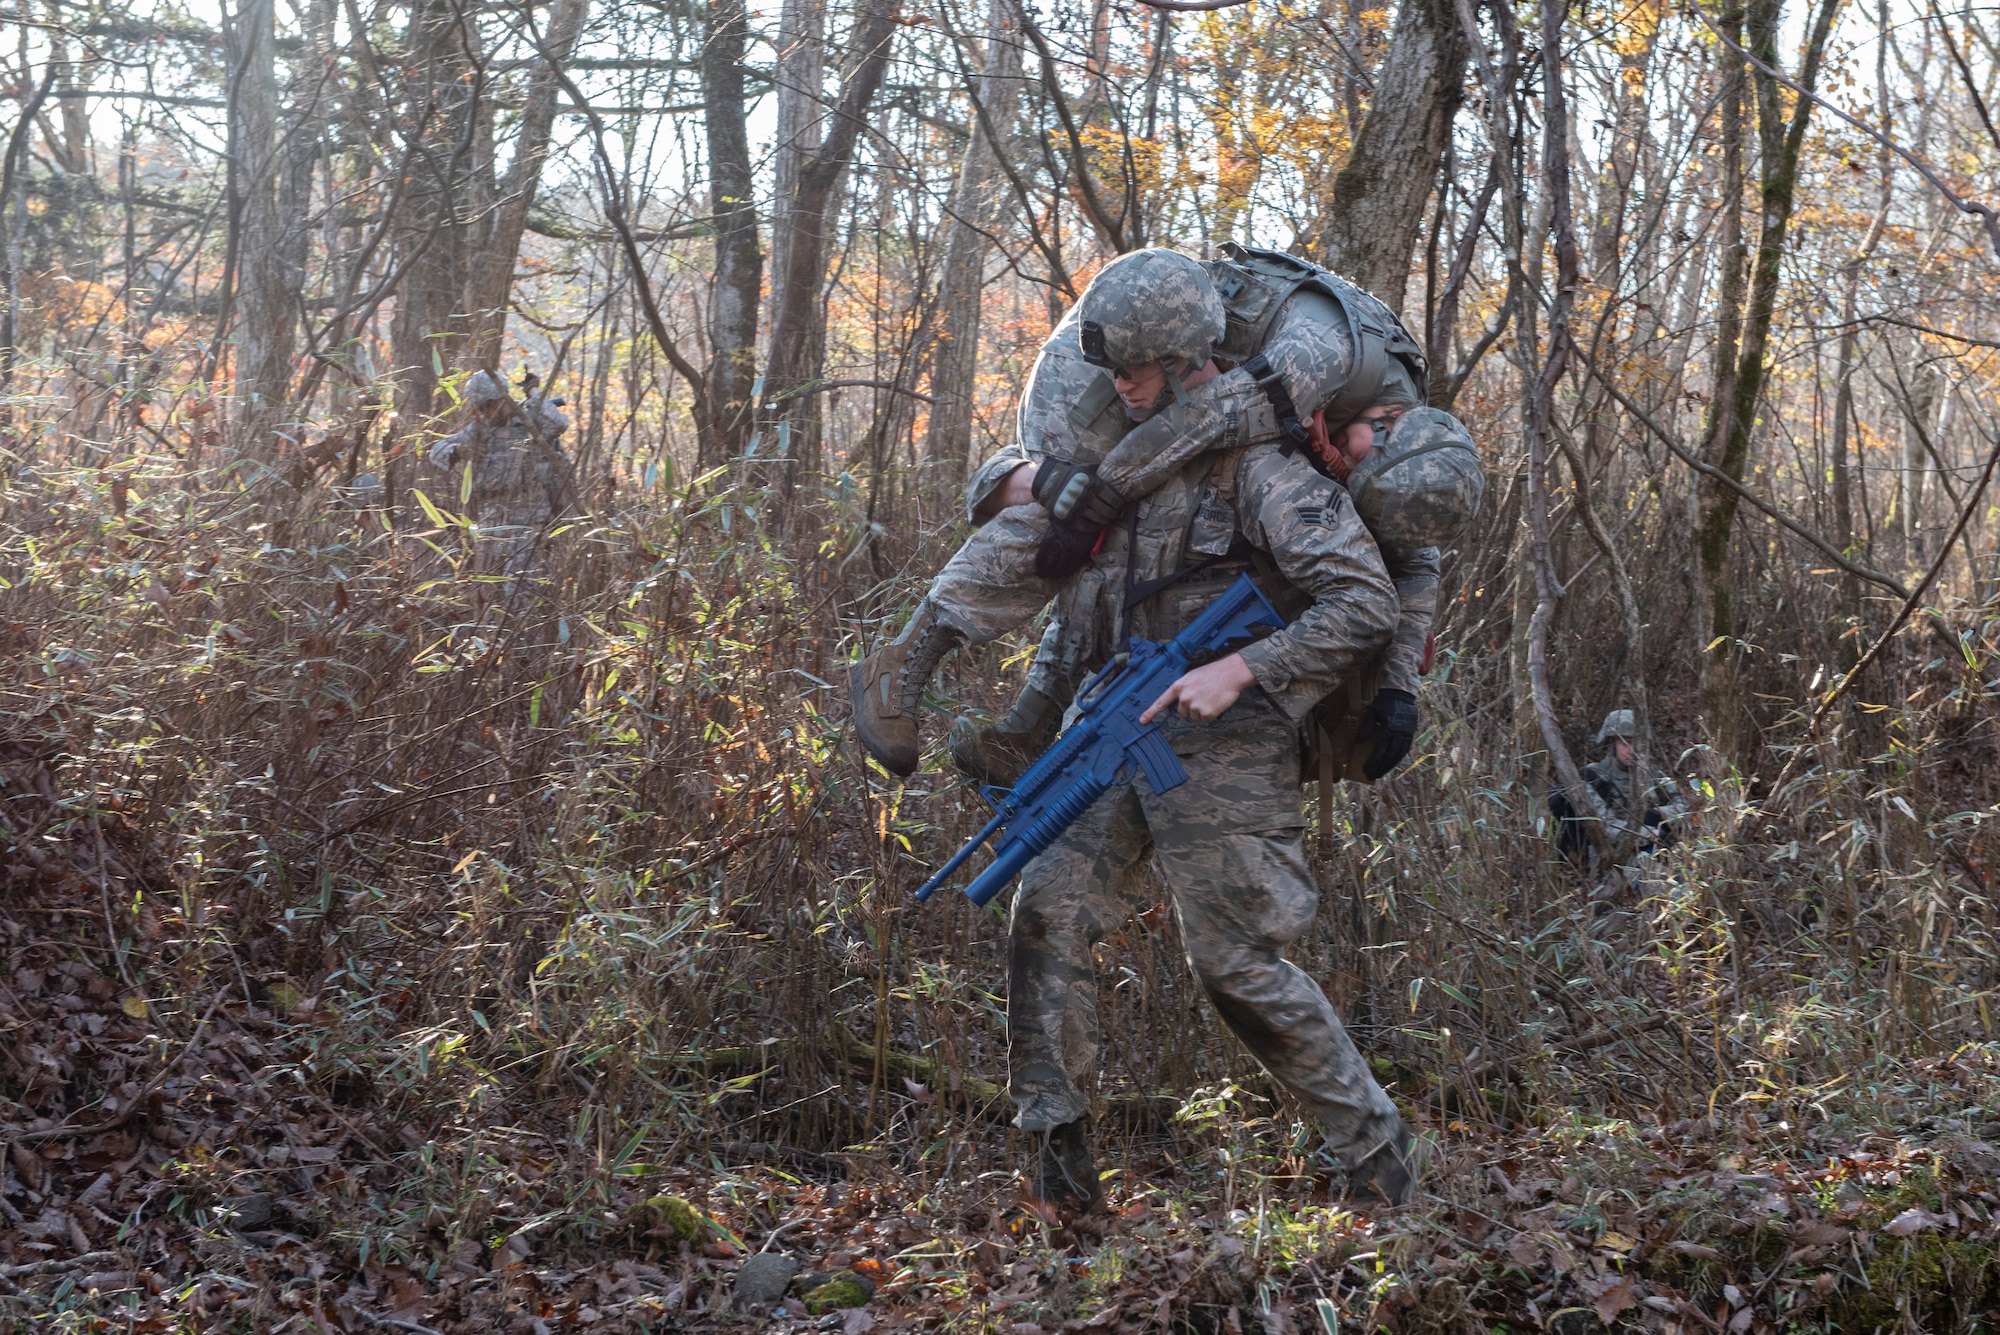 An Airman with the 374th Security Forces Squadron carries his fellow teammate with a simulated injury out of a danger area during a field training exercise at Camp Fuji, Japan, Nov. 8, 2018.